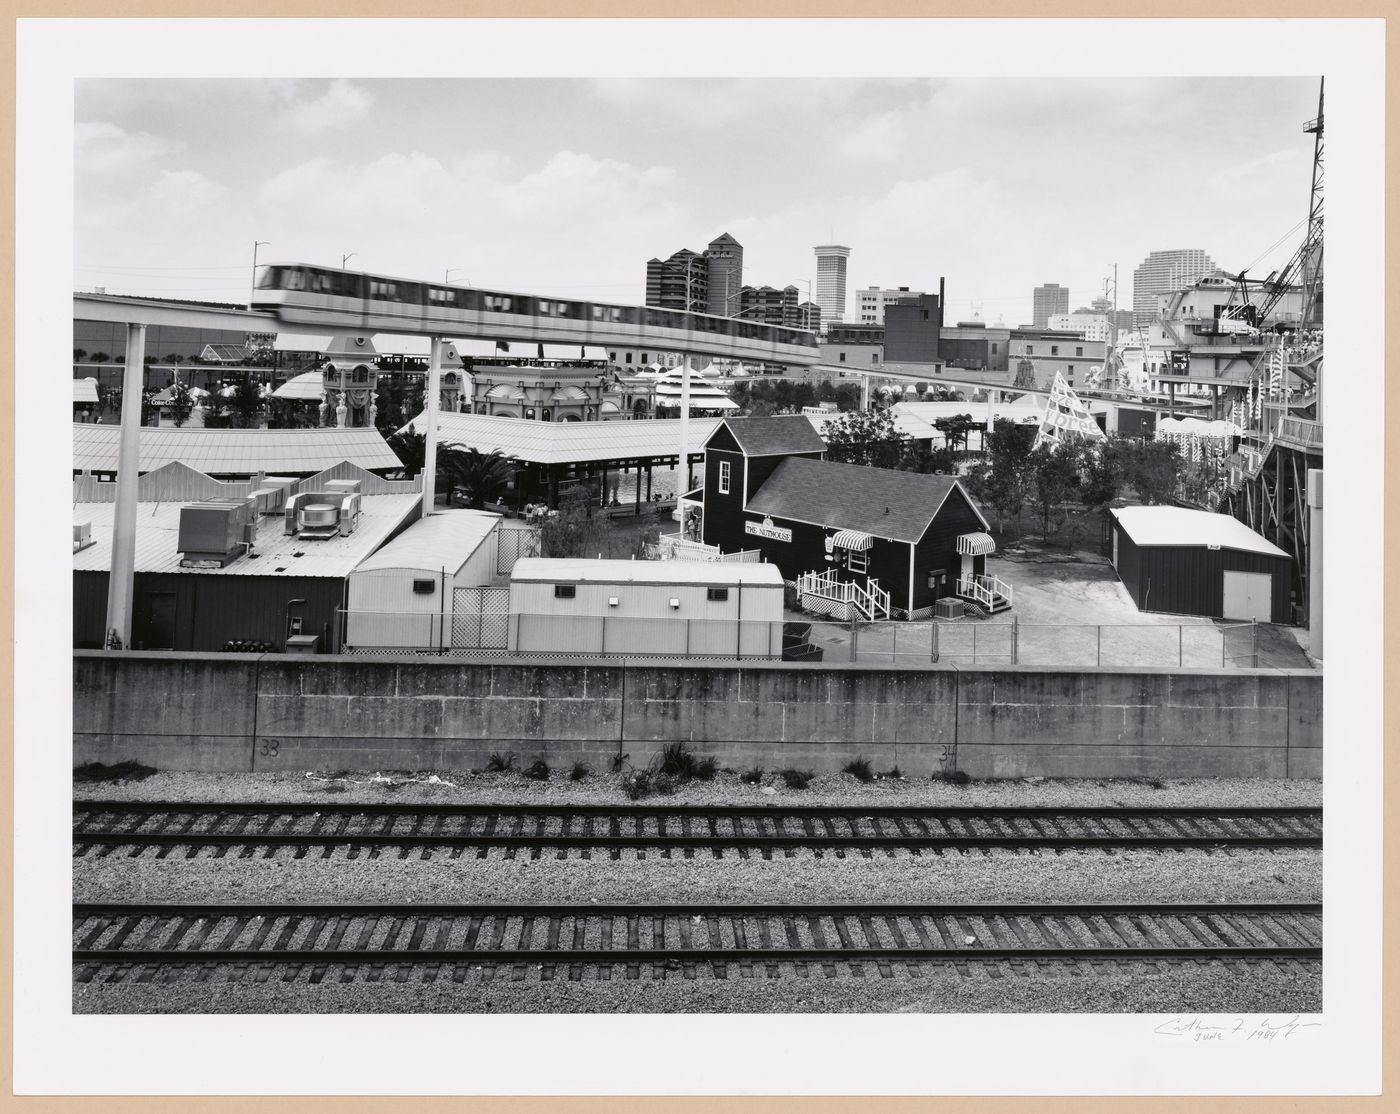 View of the Monorail train with Centennial Plaza below, Louisiana World Exposition, New Orleans